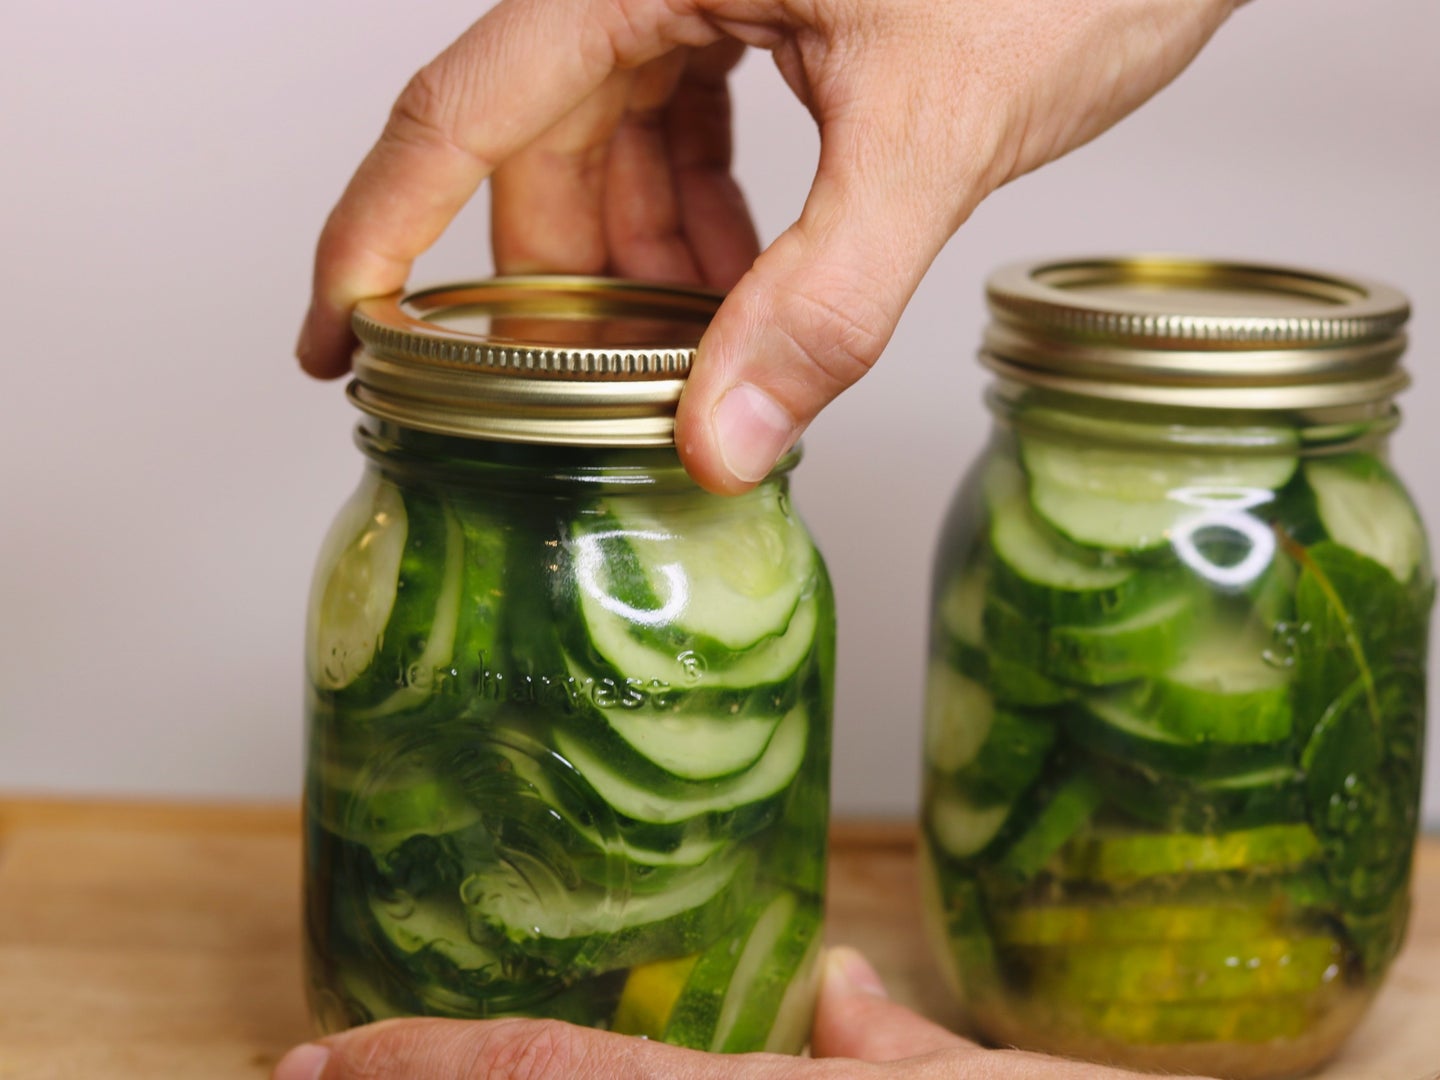 Sealing the lids of canned vegetables